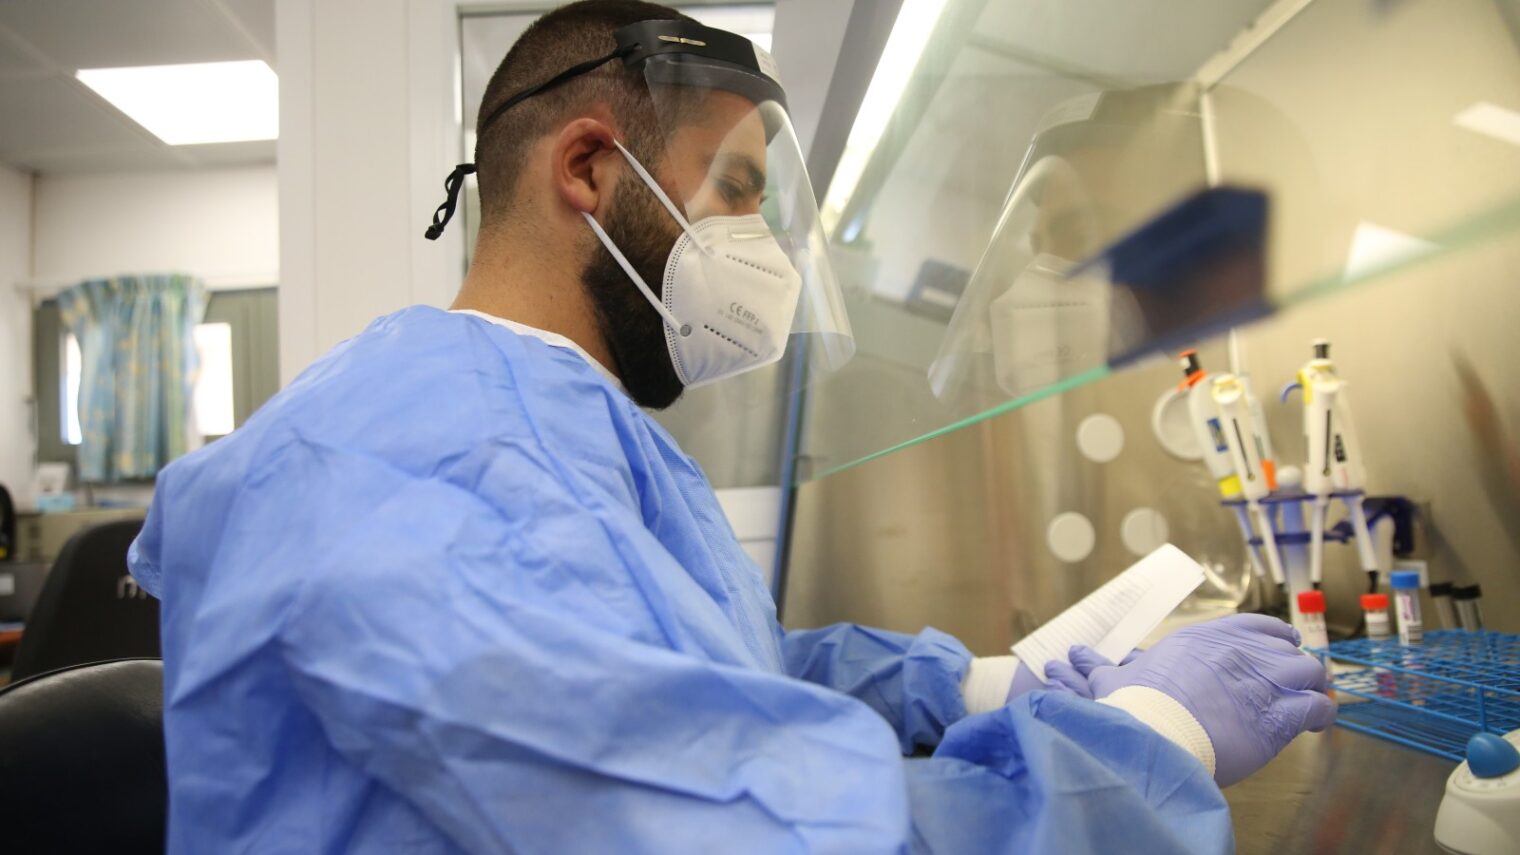 A technician carries out a diagnostic test for coronavirus at Ziv Medical Center in Safed. Photo by David Cohen/Flash90